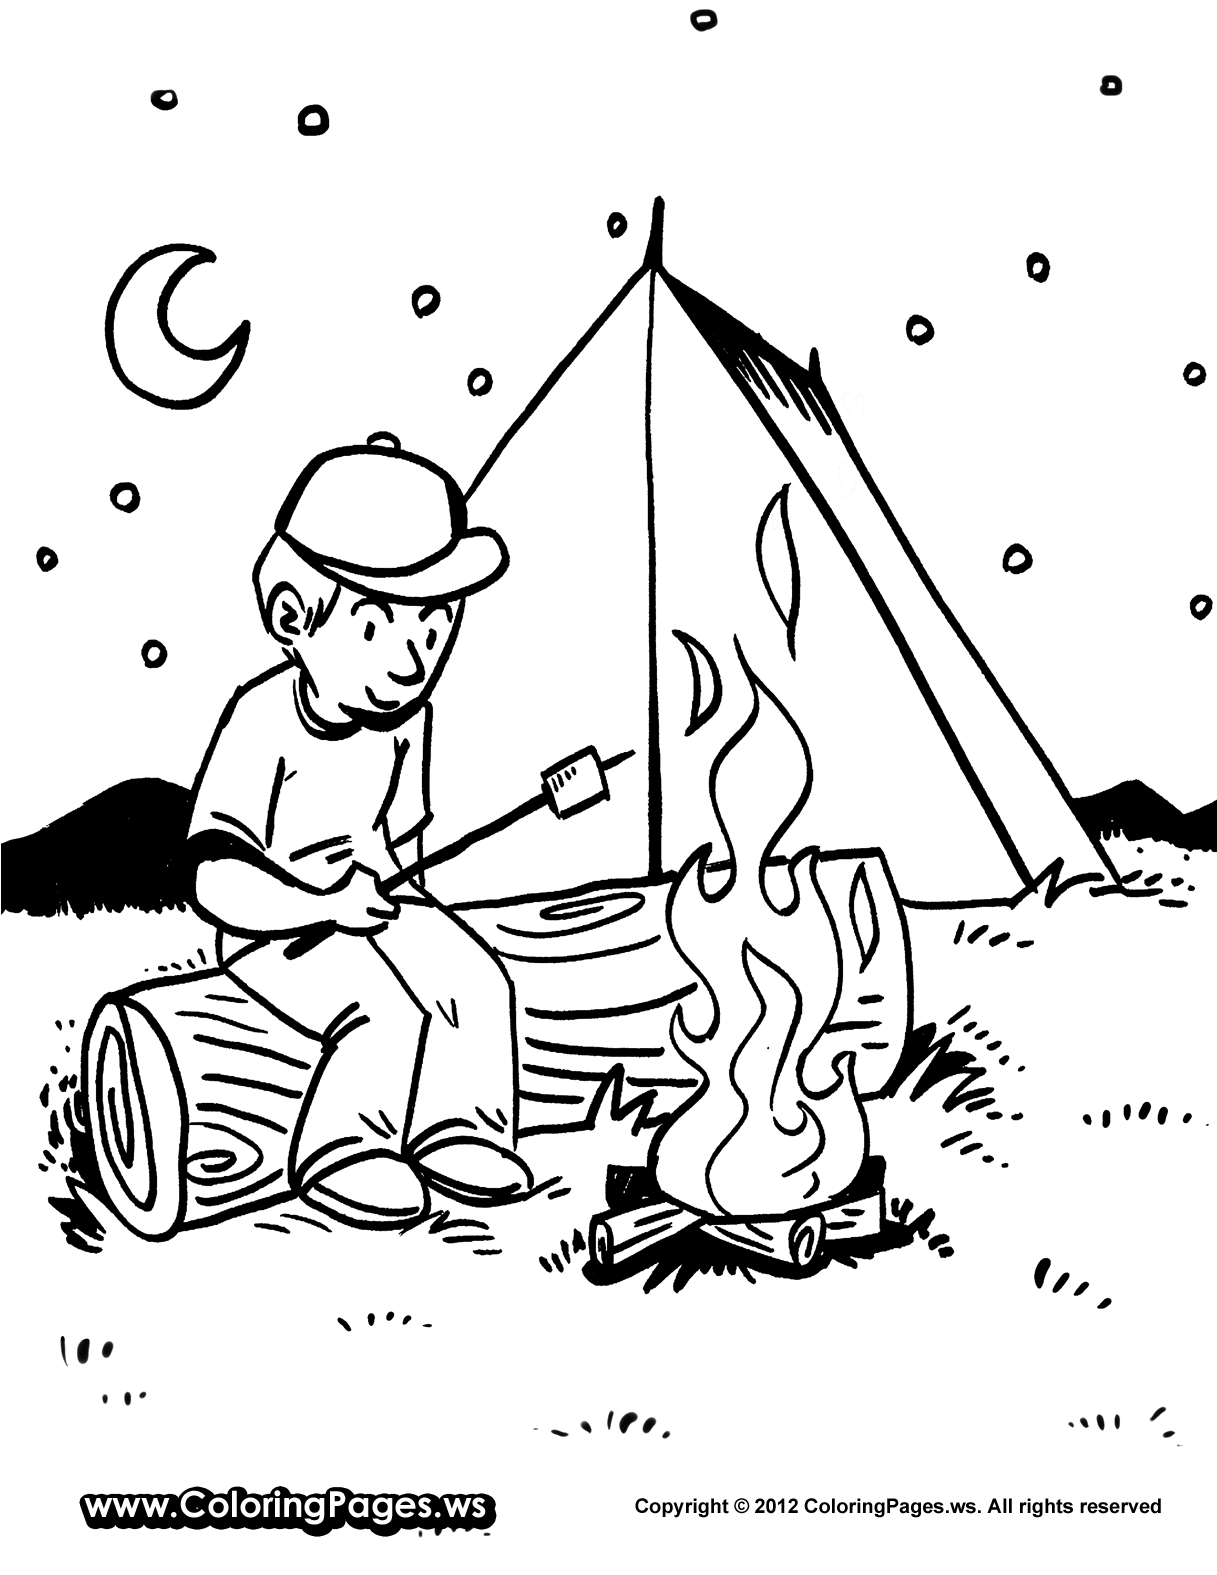 camp coloring pages camping coloring pages best coloring pages for kids camp coloring pages 1 2